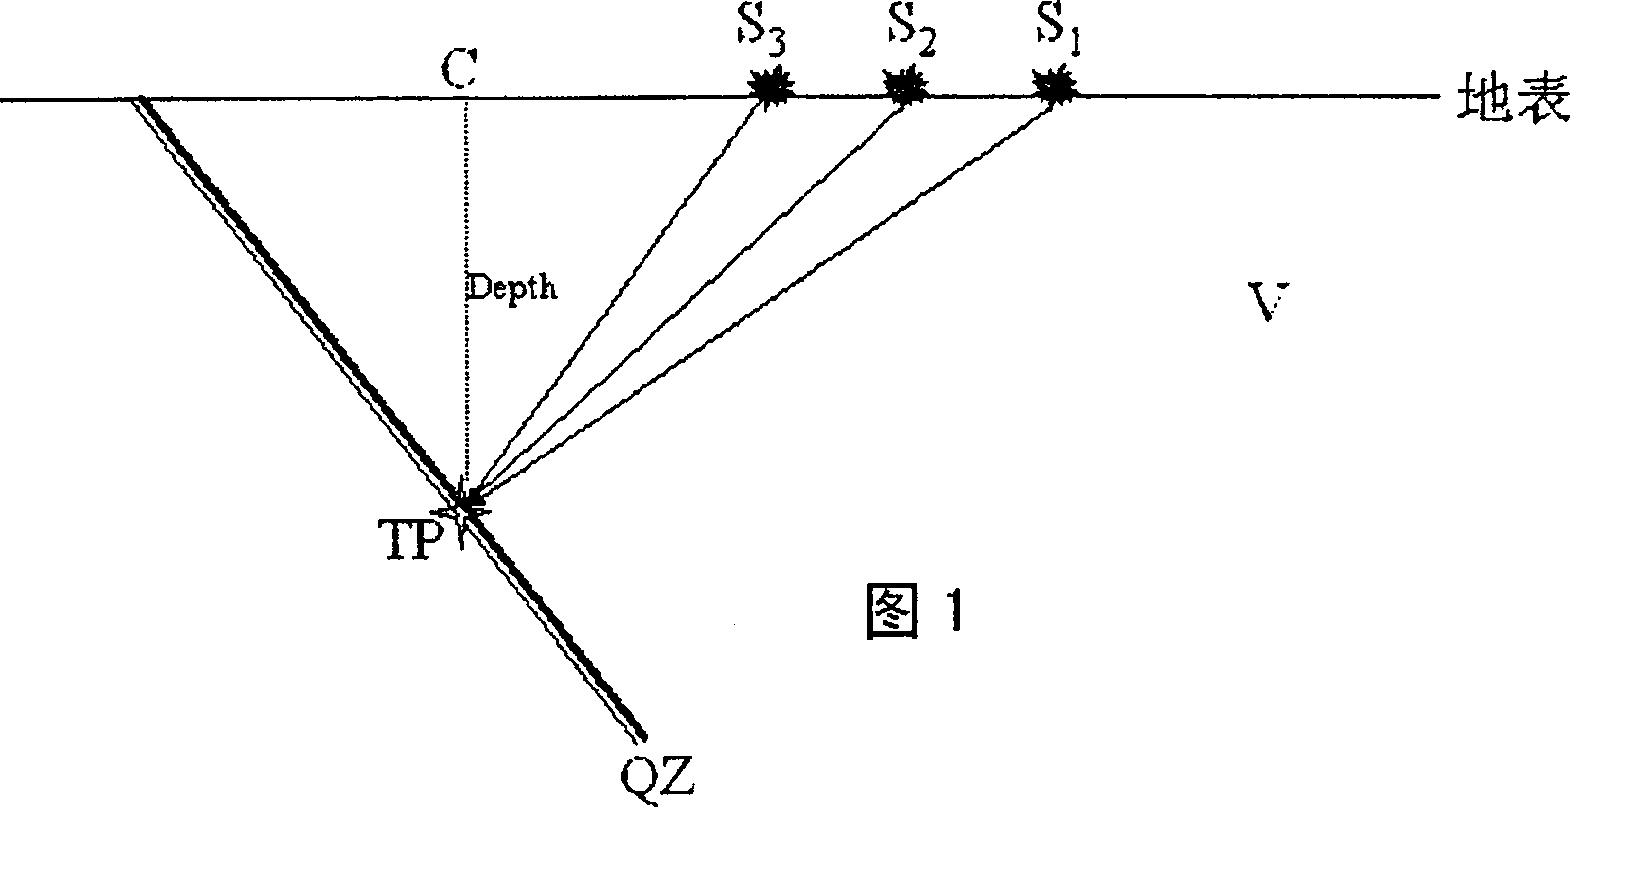 Method for surveying blind deposit with solid tide piezo-electric effect and spontaneous potential